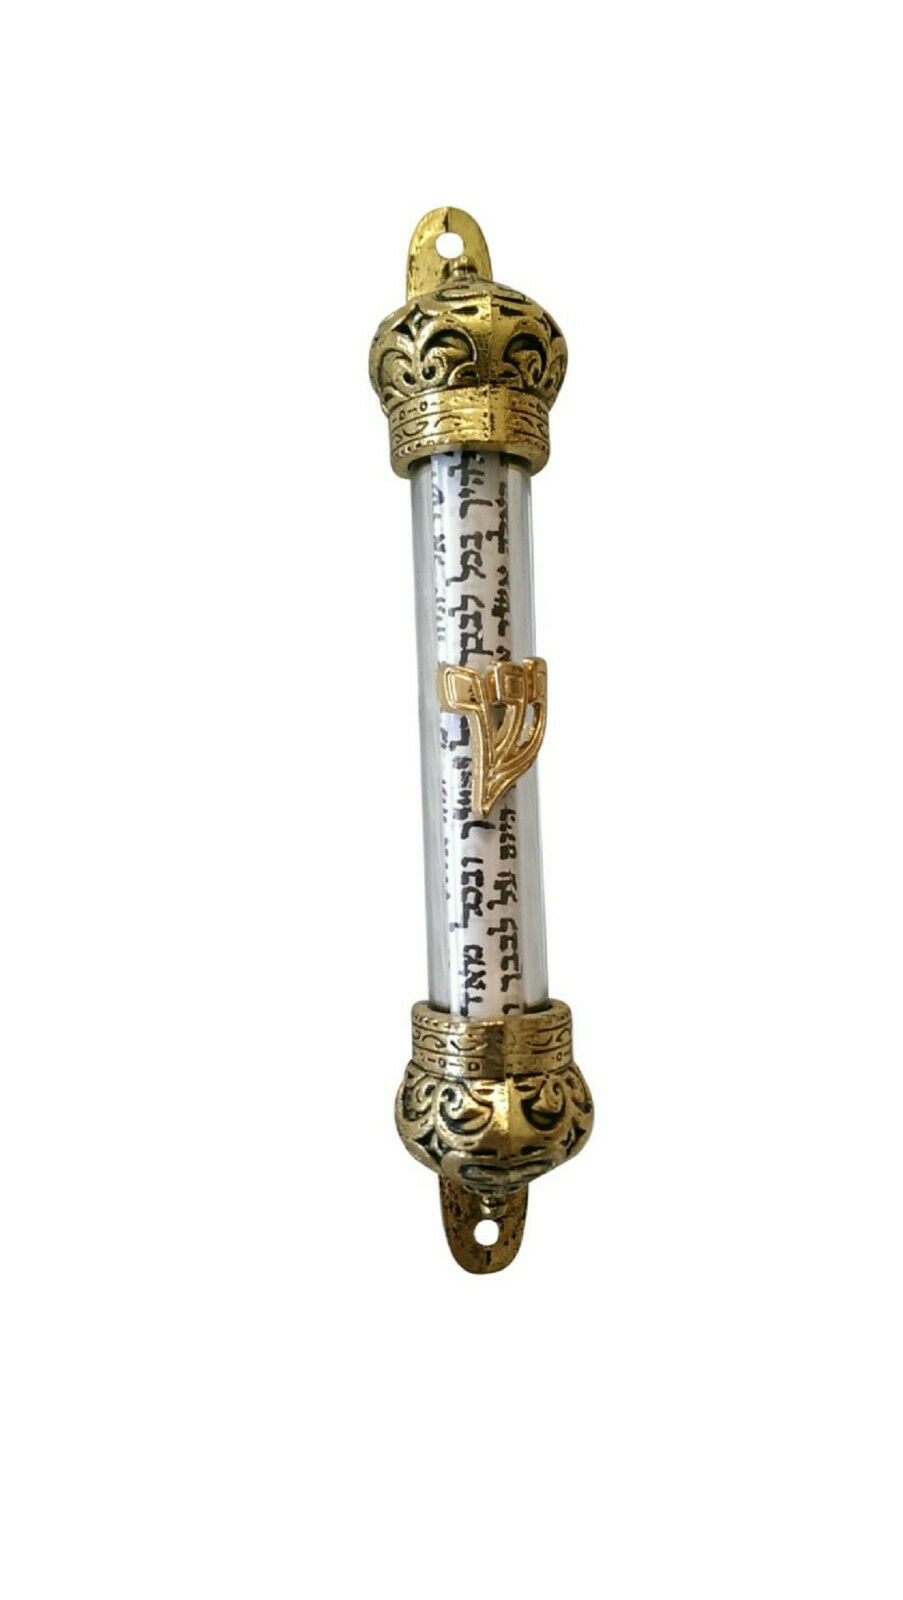 Gold Plated Glass Mezuzah With Shma Israel Prayer Scroll From The Holy Land